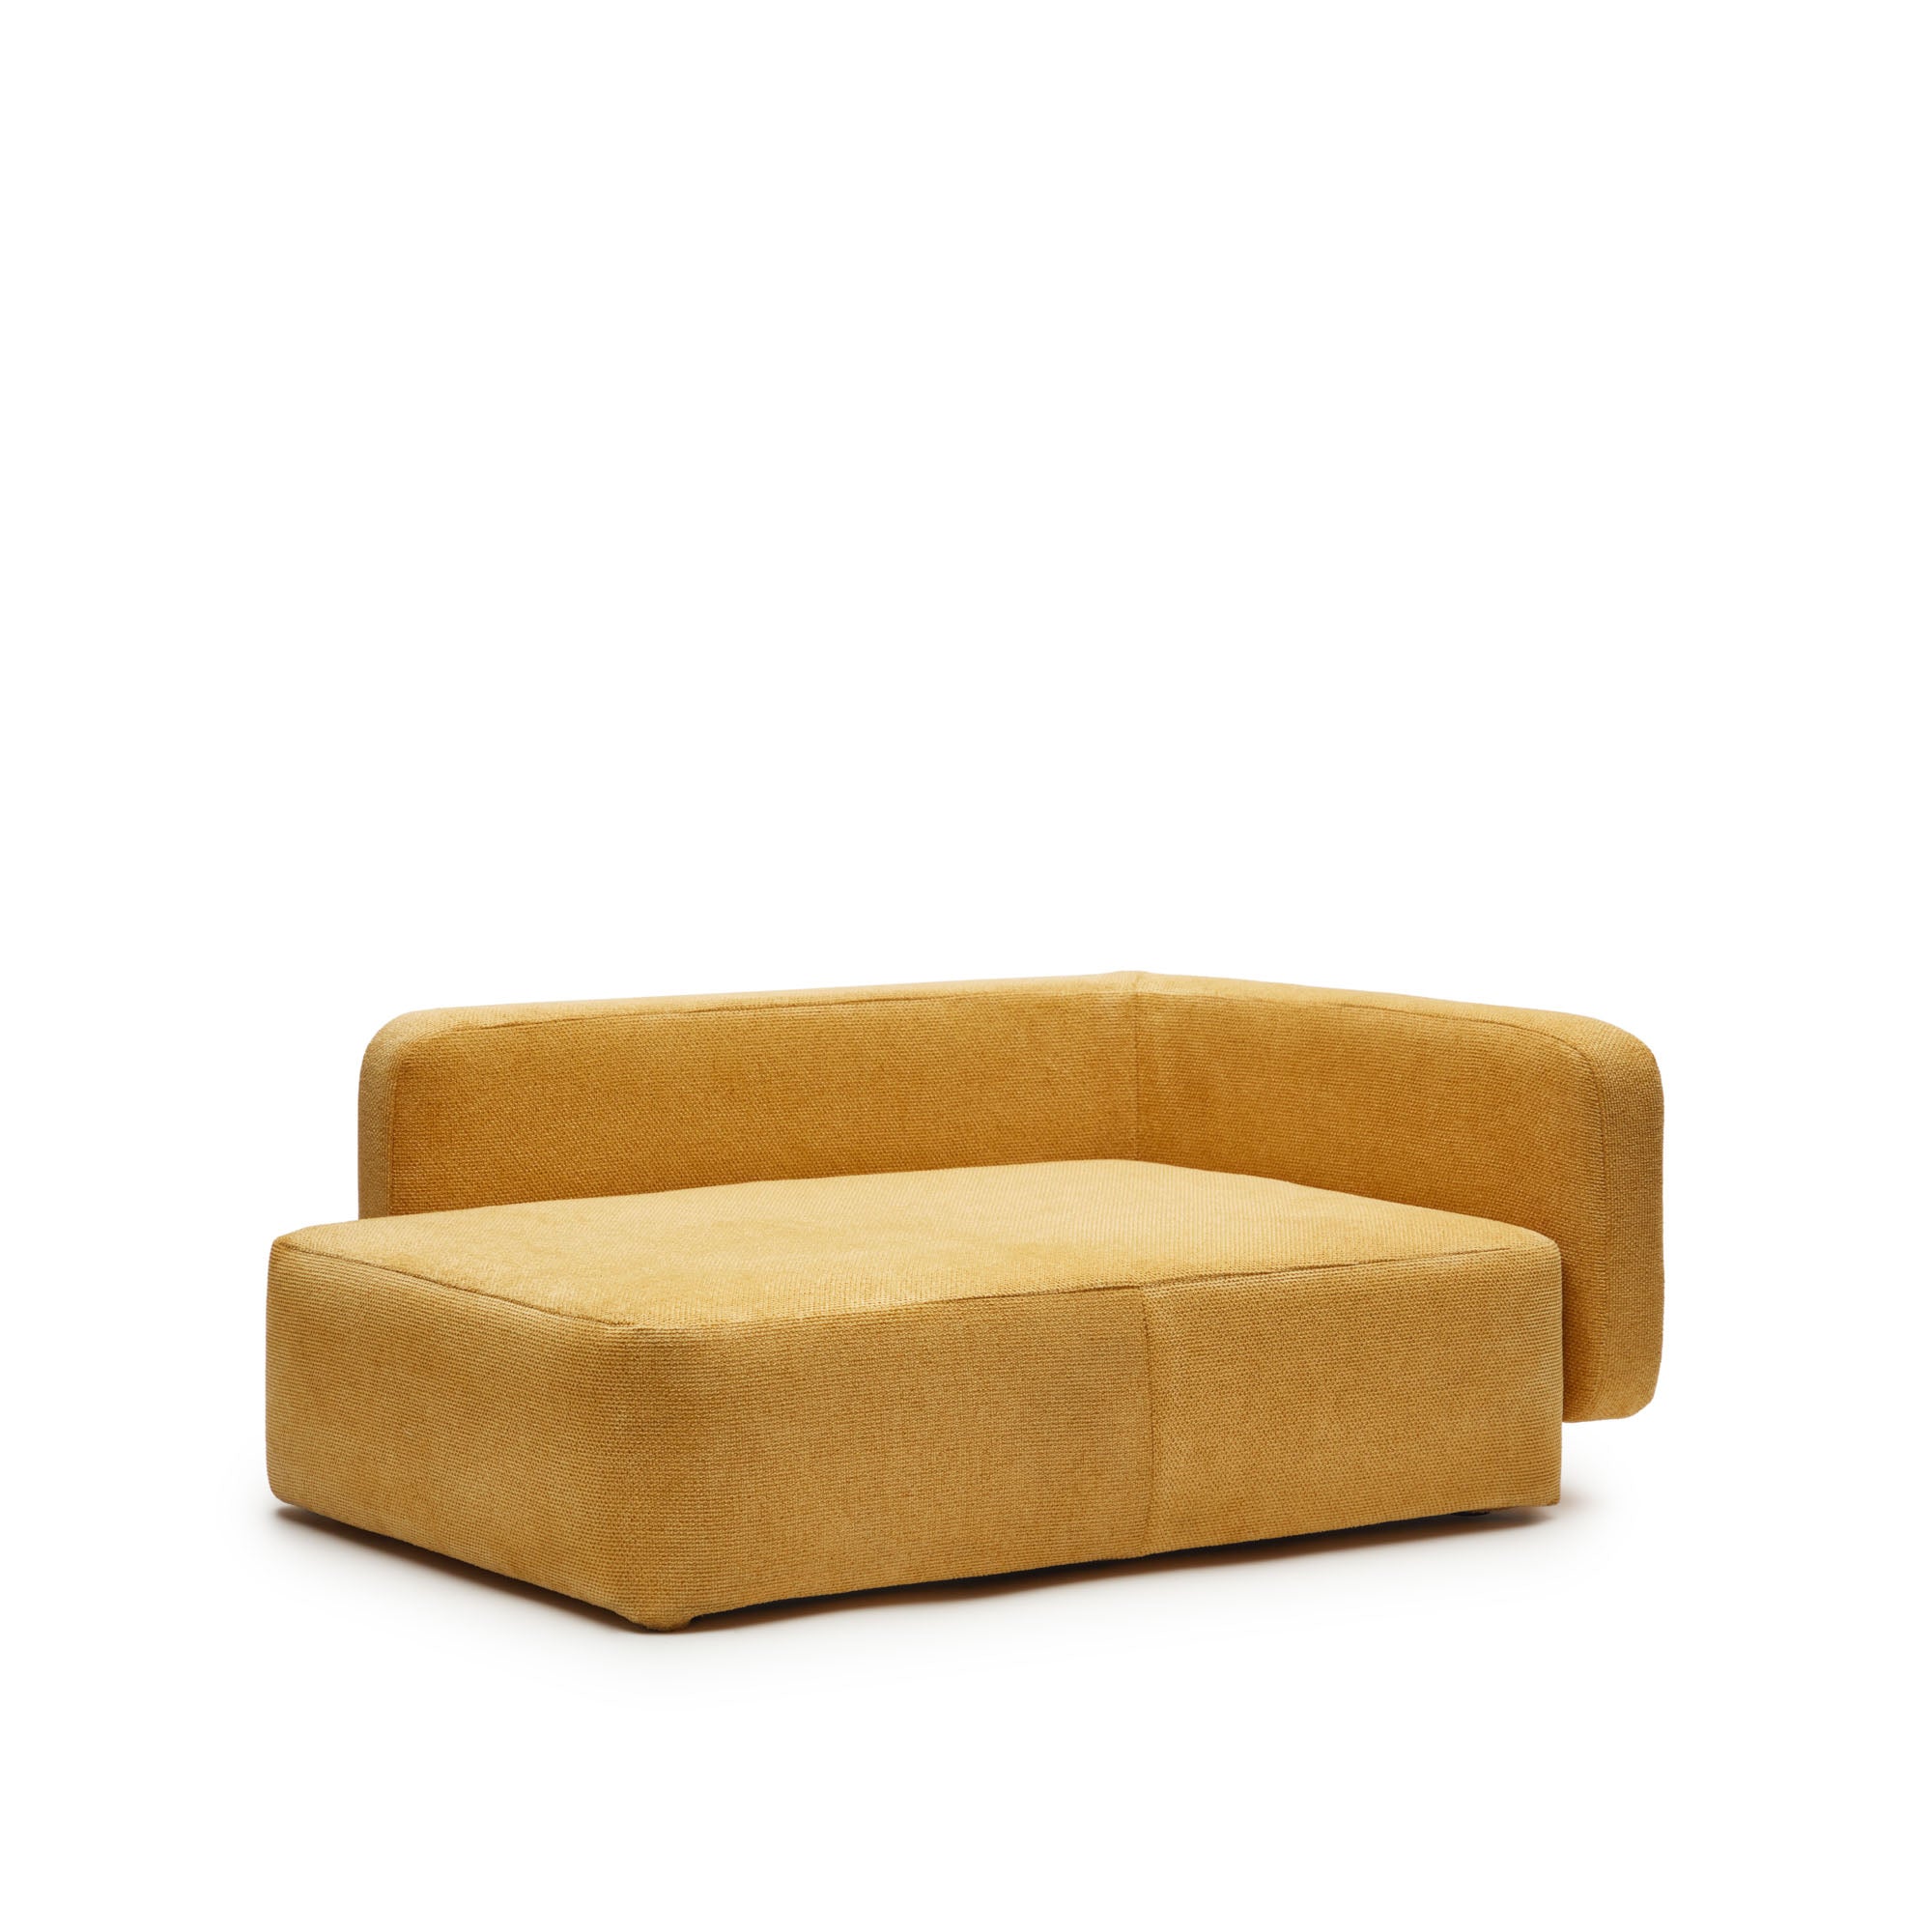 Bowie small bed for pets in mustard 63 x 80 cm